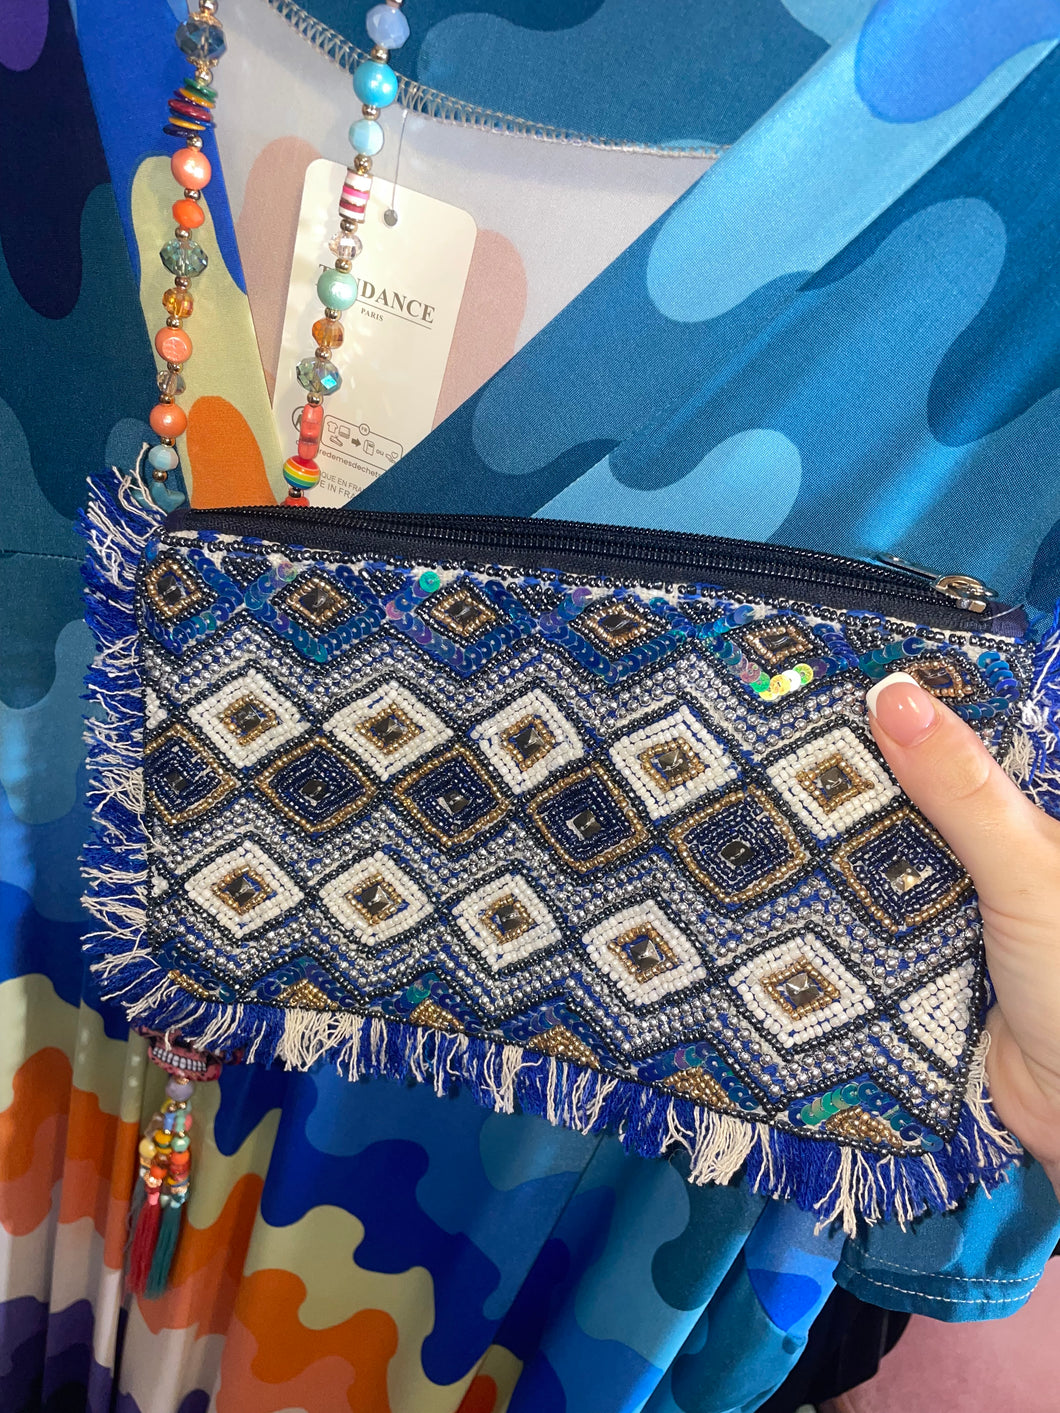 Makeup/clutch bag embroidered